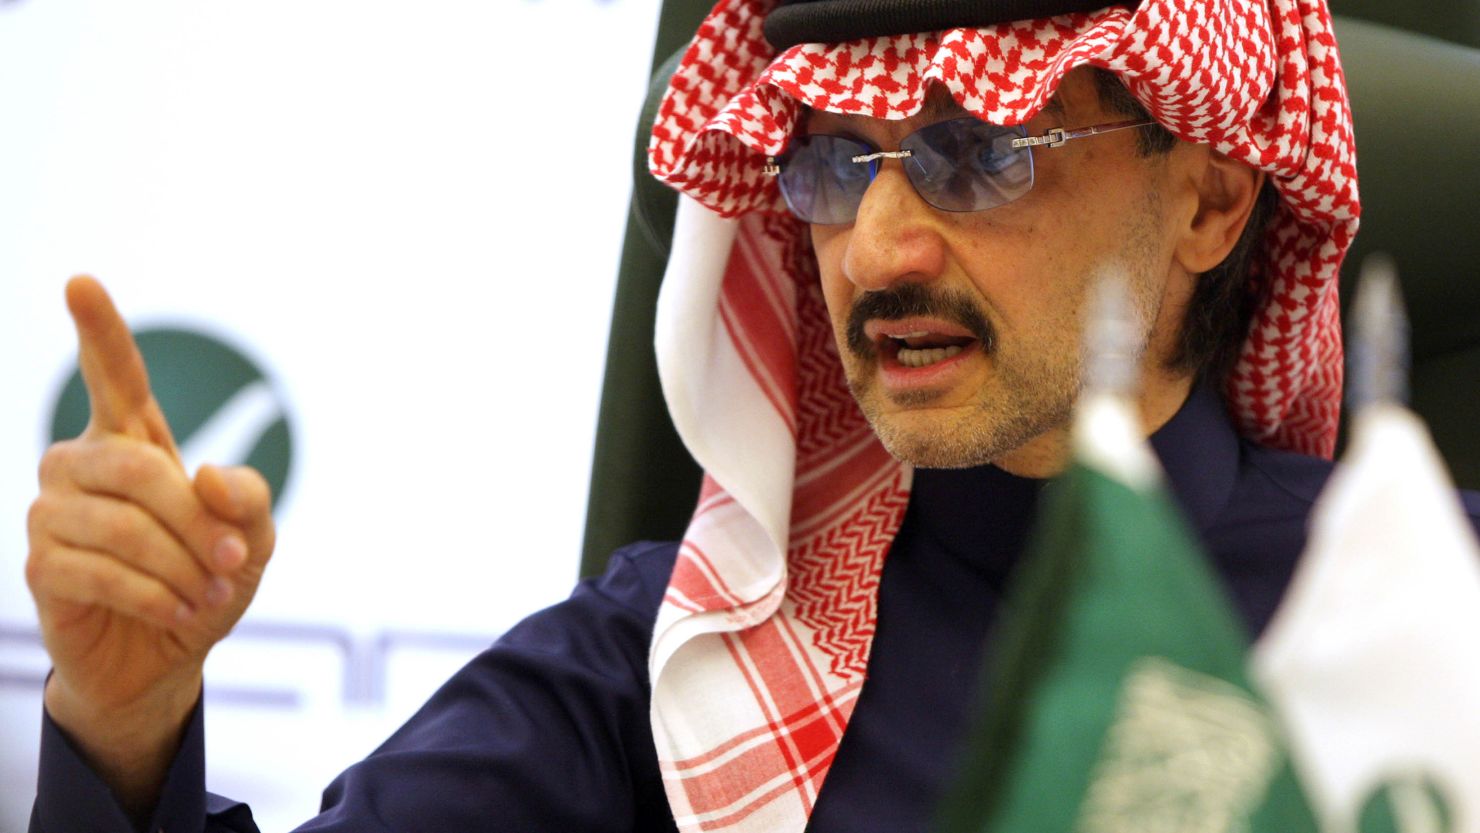 In an interview with CNN, Prince Alwaleed Bin Talal comments on if foreign investors will still be welcomed in Saudi Arabia